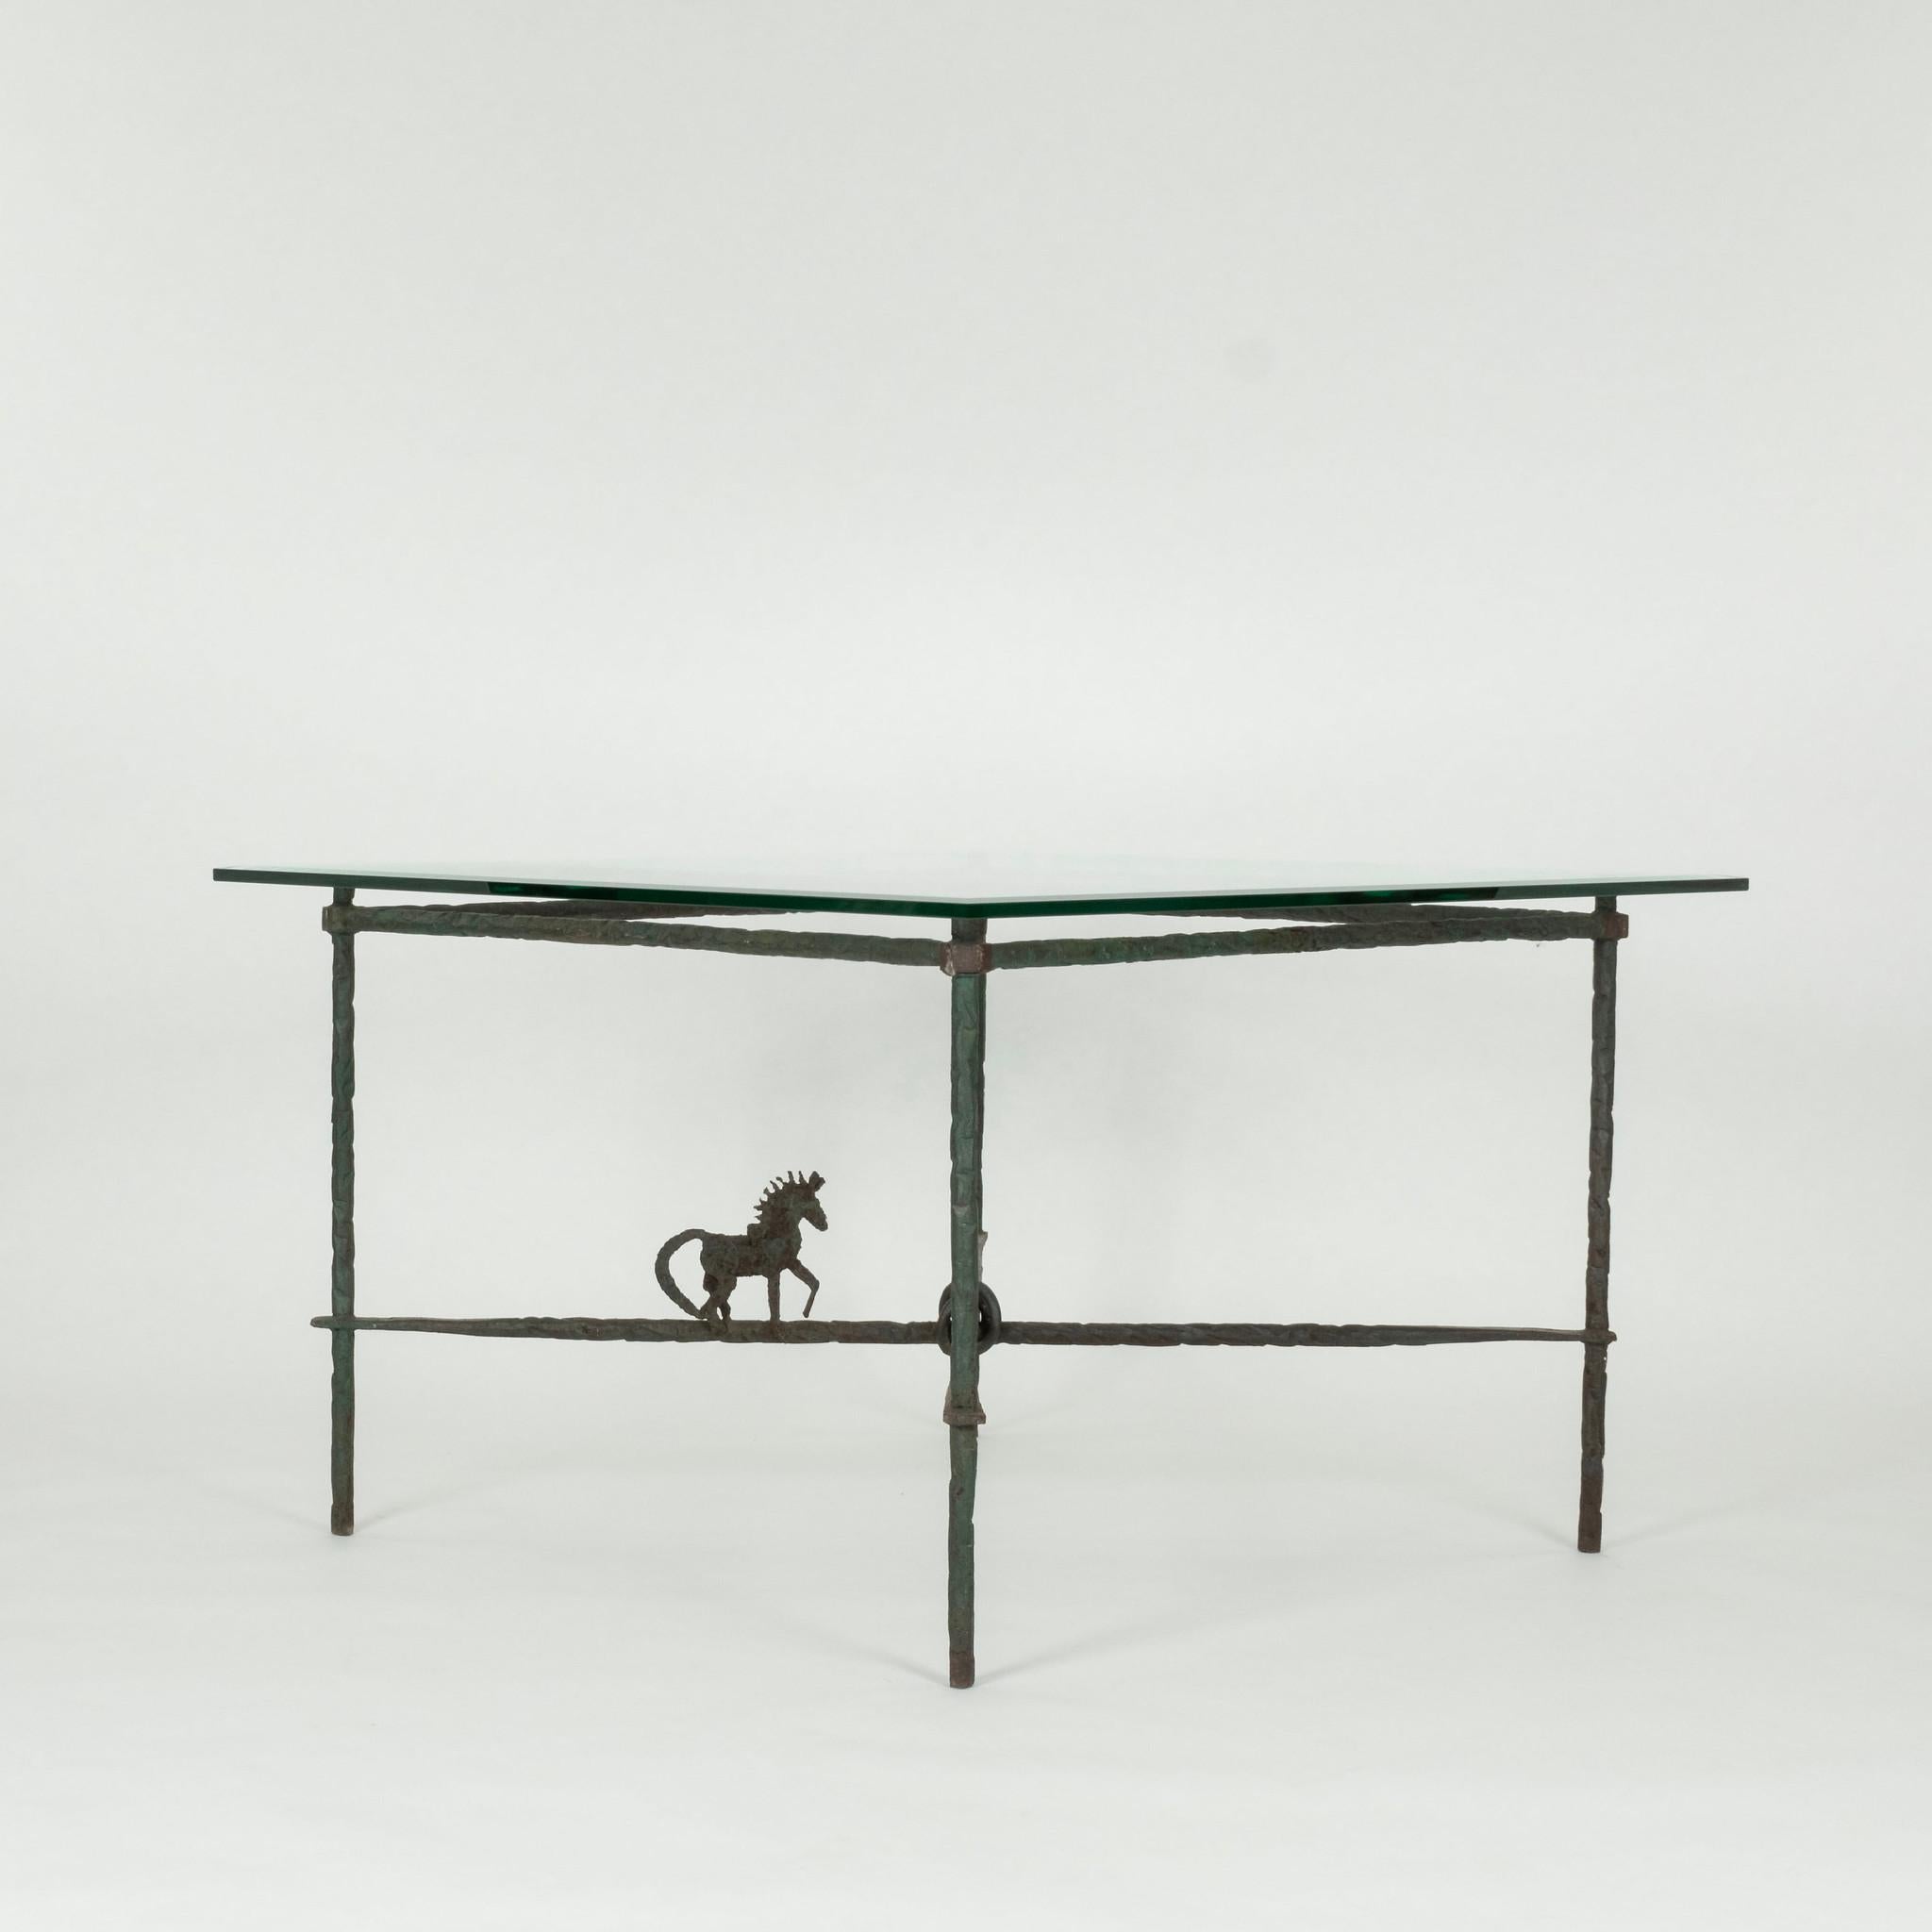 Green Verdigris Horse Wrought Iron Glass Dining Table Attr. Giacometti For Sale 4